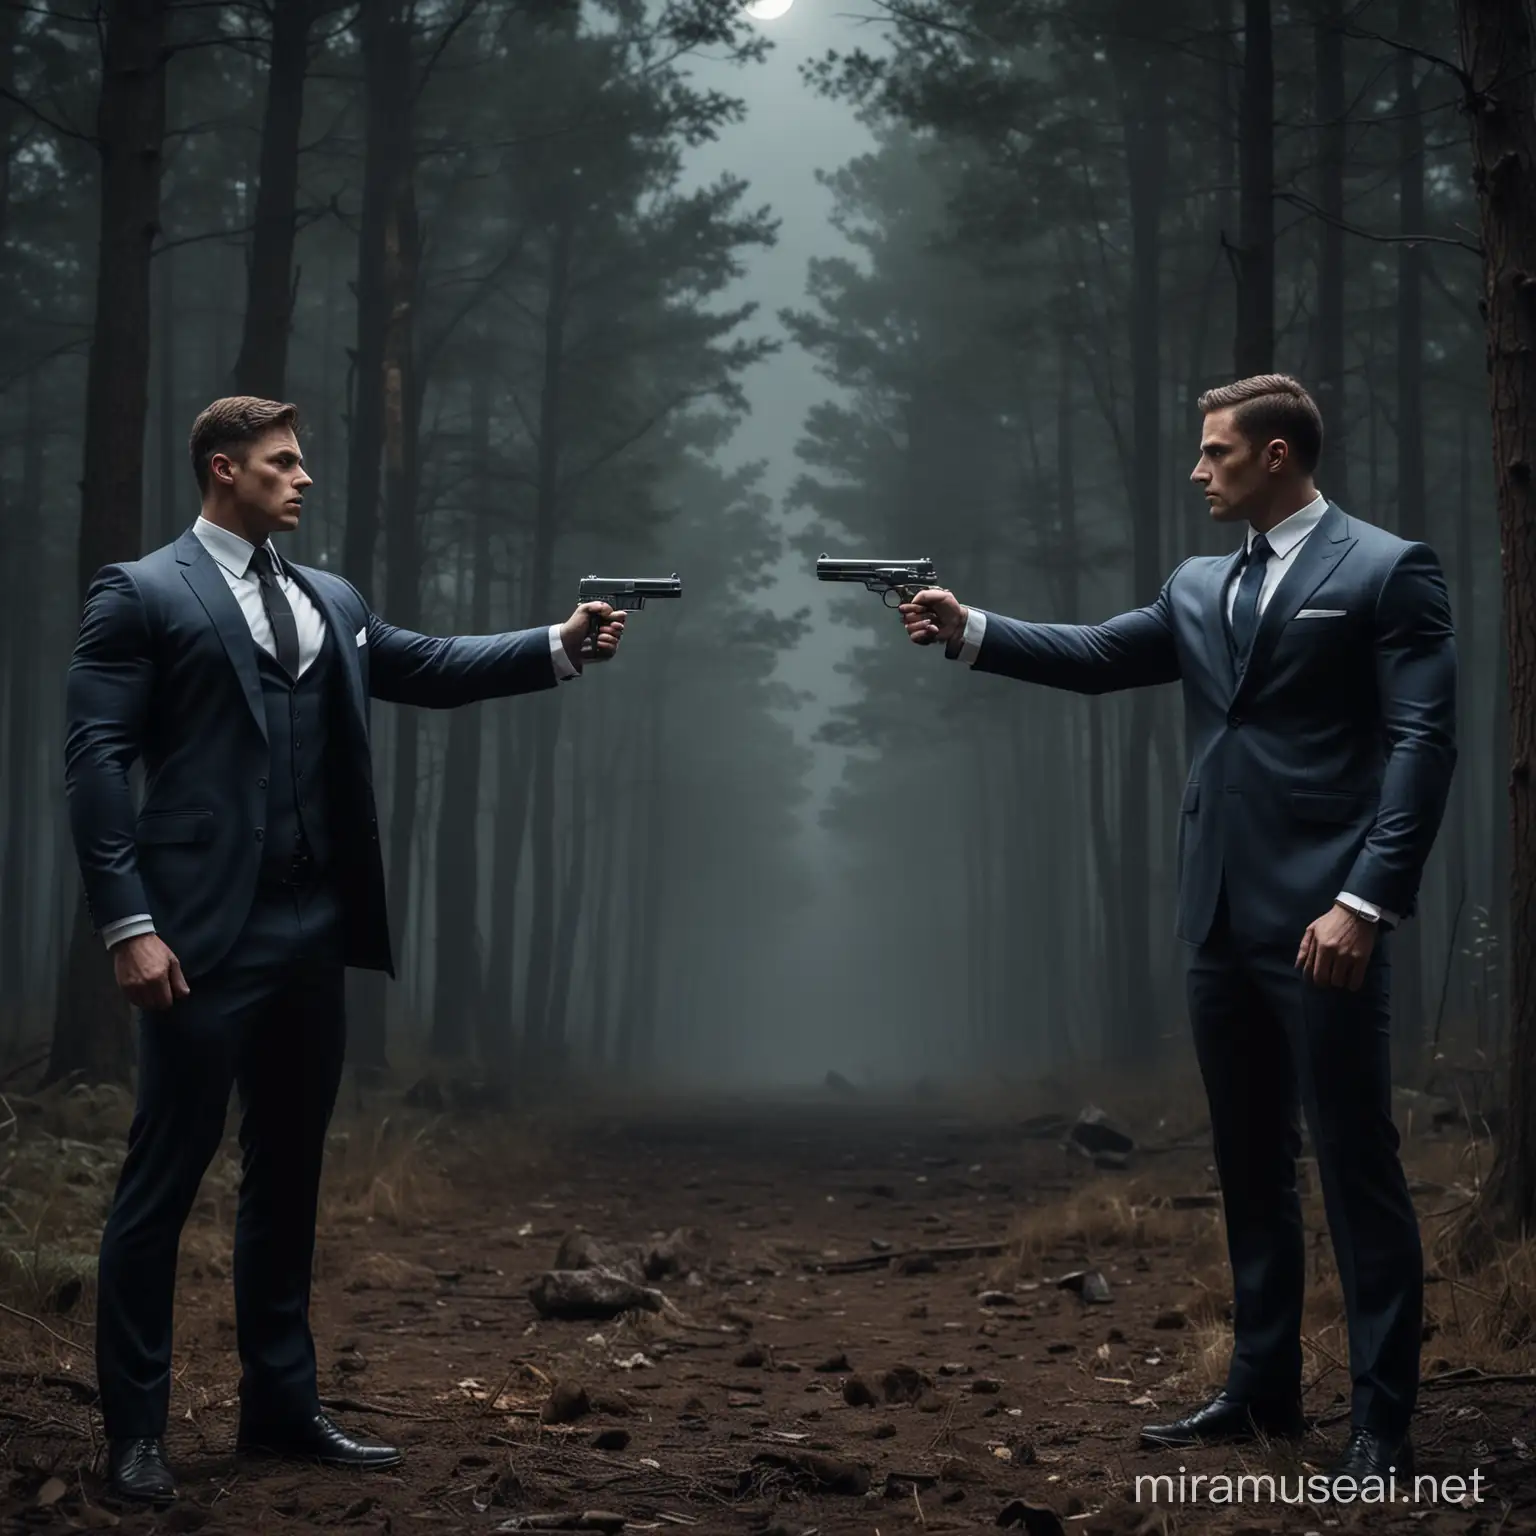 Intense Standoff Two Muscular Men in Suits Pointing Guns in Moonlit Forest